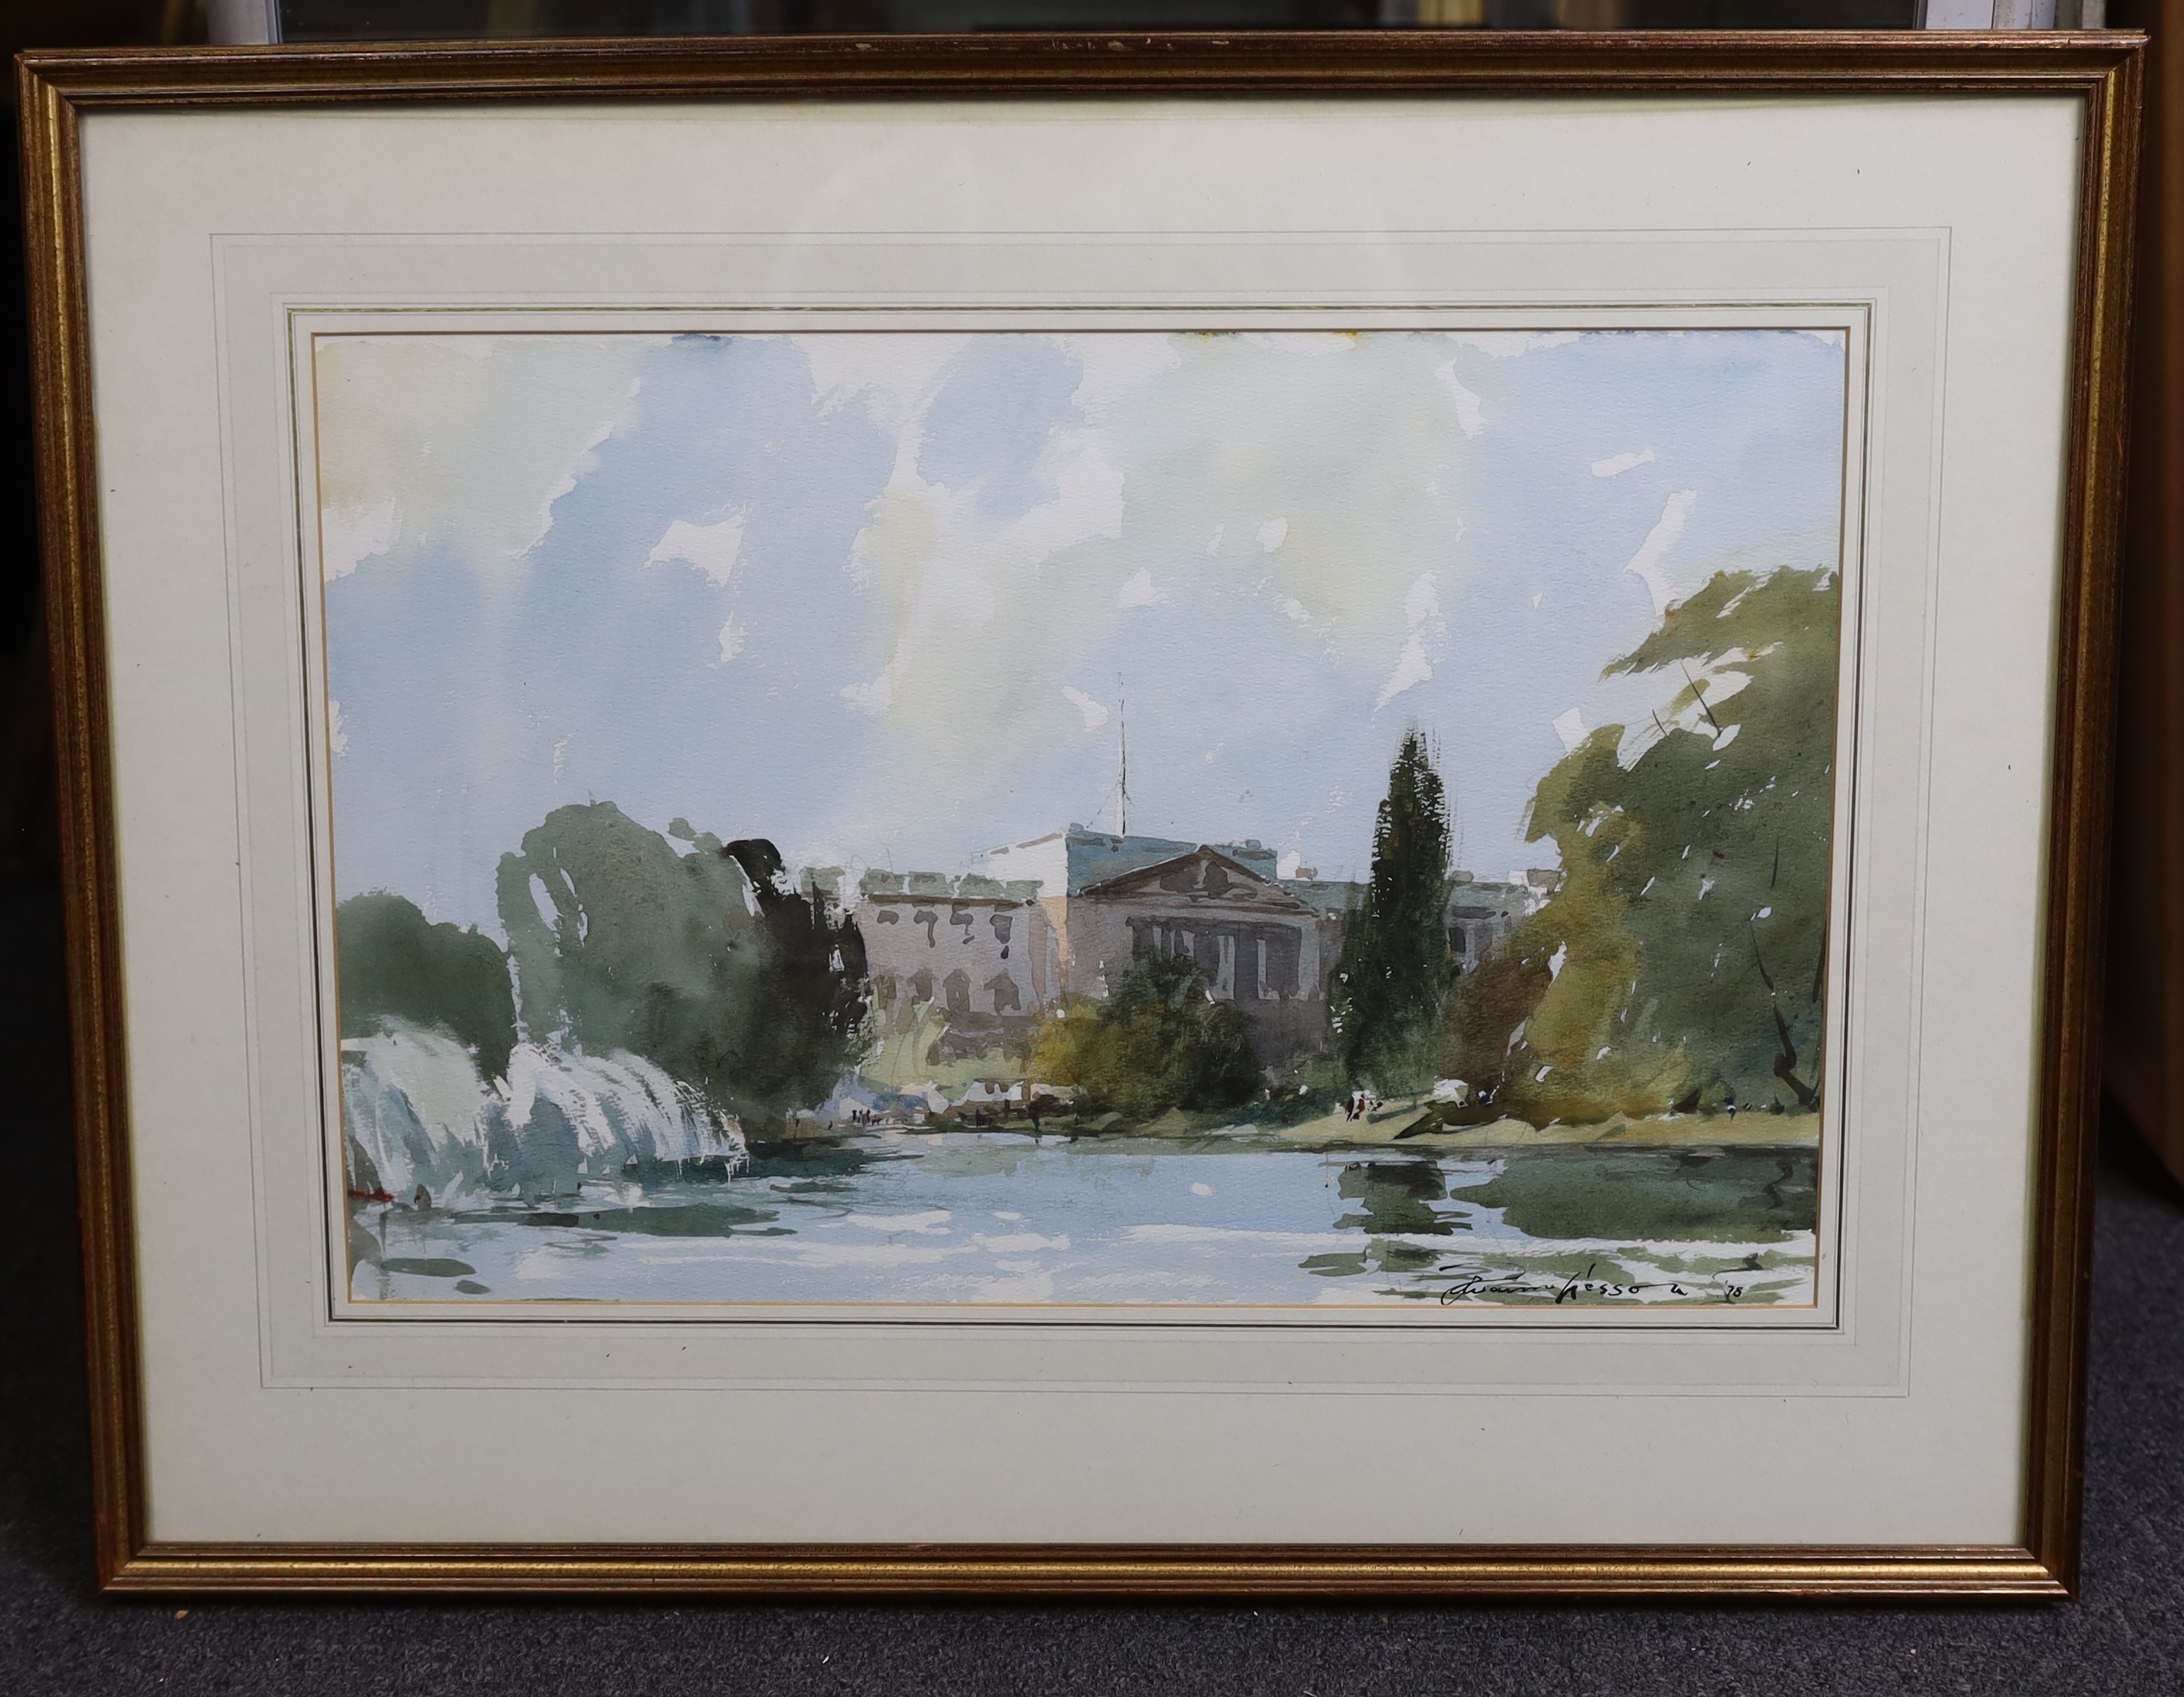 Edward Wesson (English, 1910-1983), watercolour, Buckingham Palace, signed in ink and dated '78, 33 x 49cm. Condition - fair to good